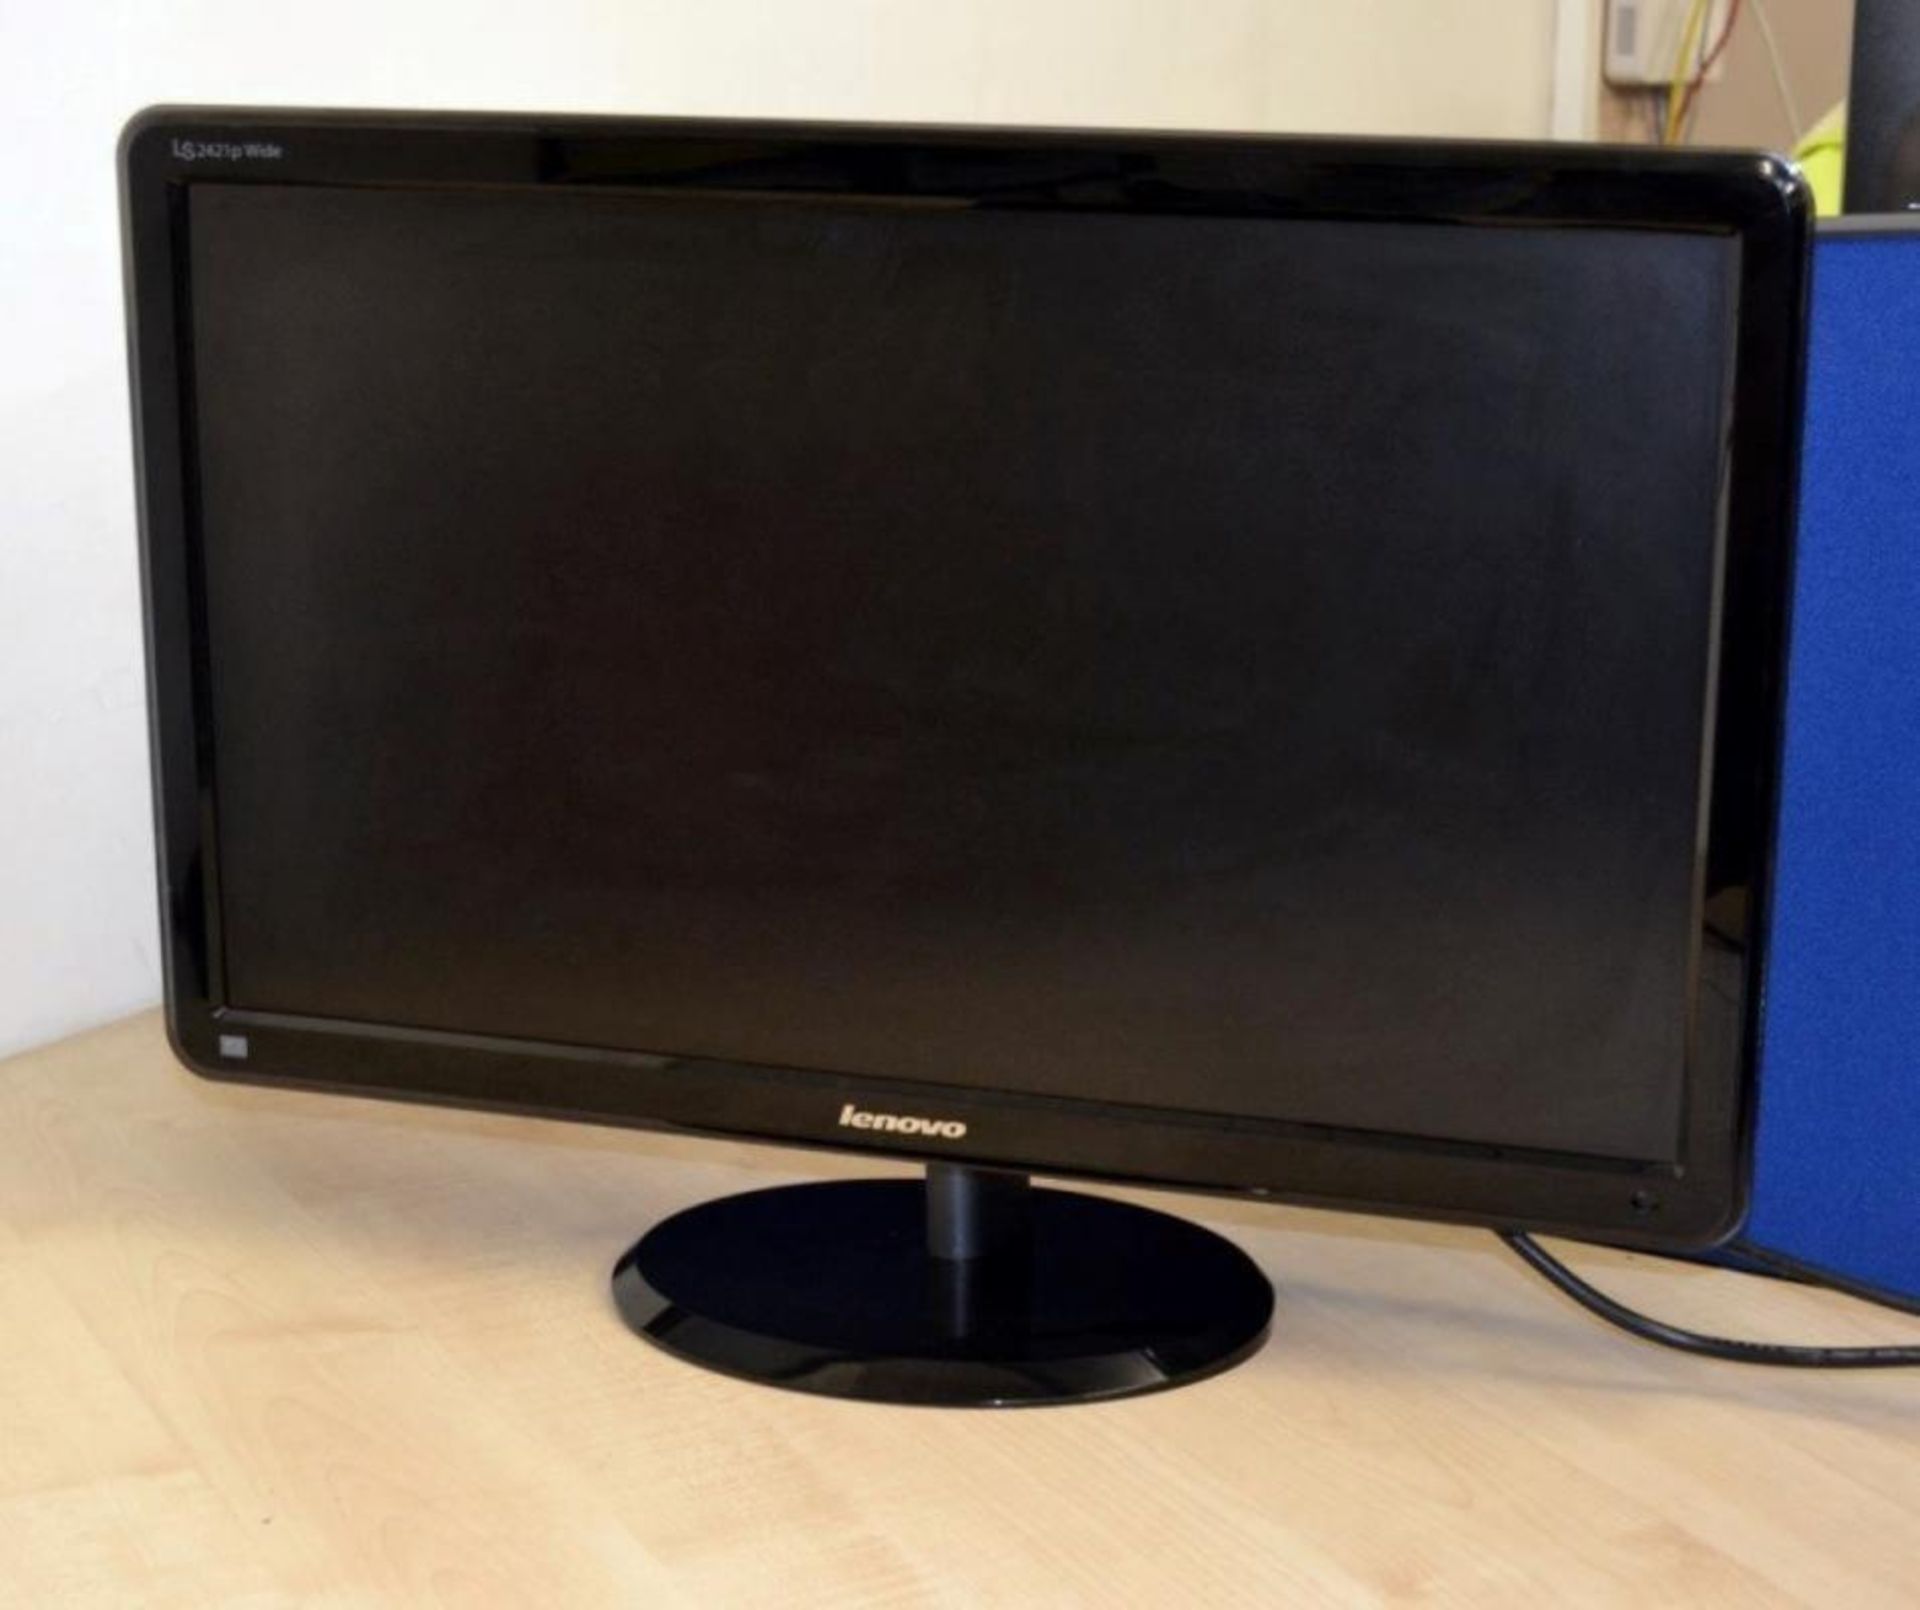 1 x Lenovo LS2421p Wide 23.6" Full HD LED TFT Monitor (Model: 4015-LS1) - Recently Taken From A - Image 6 of 7